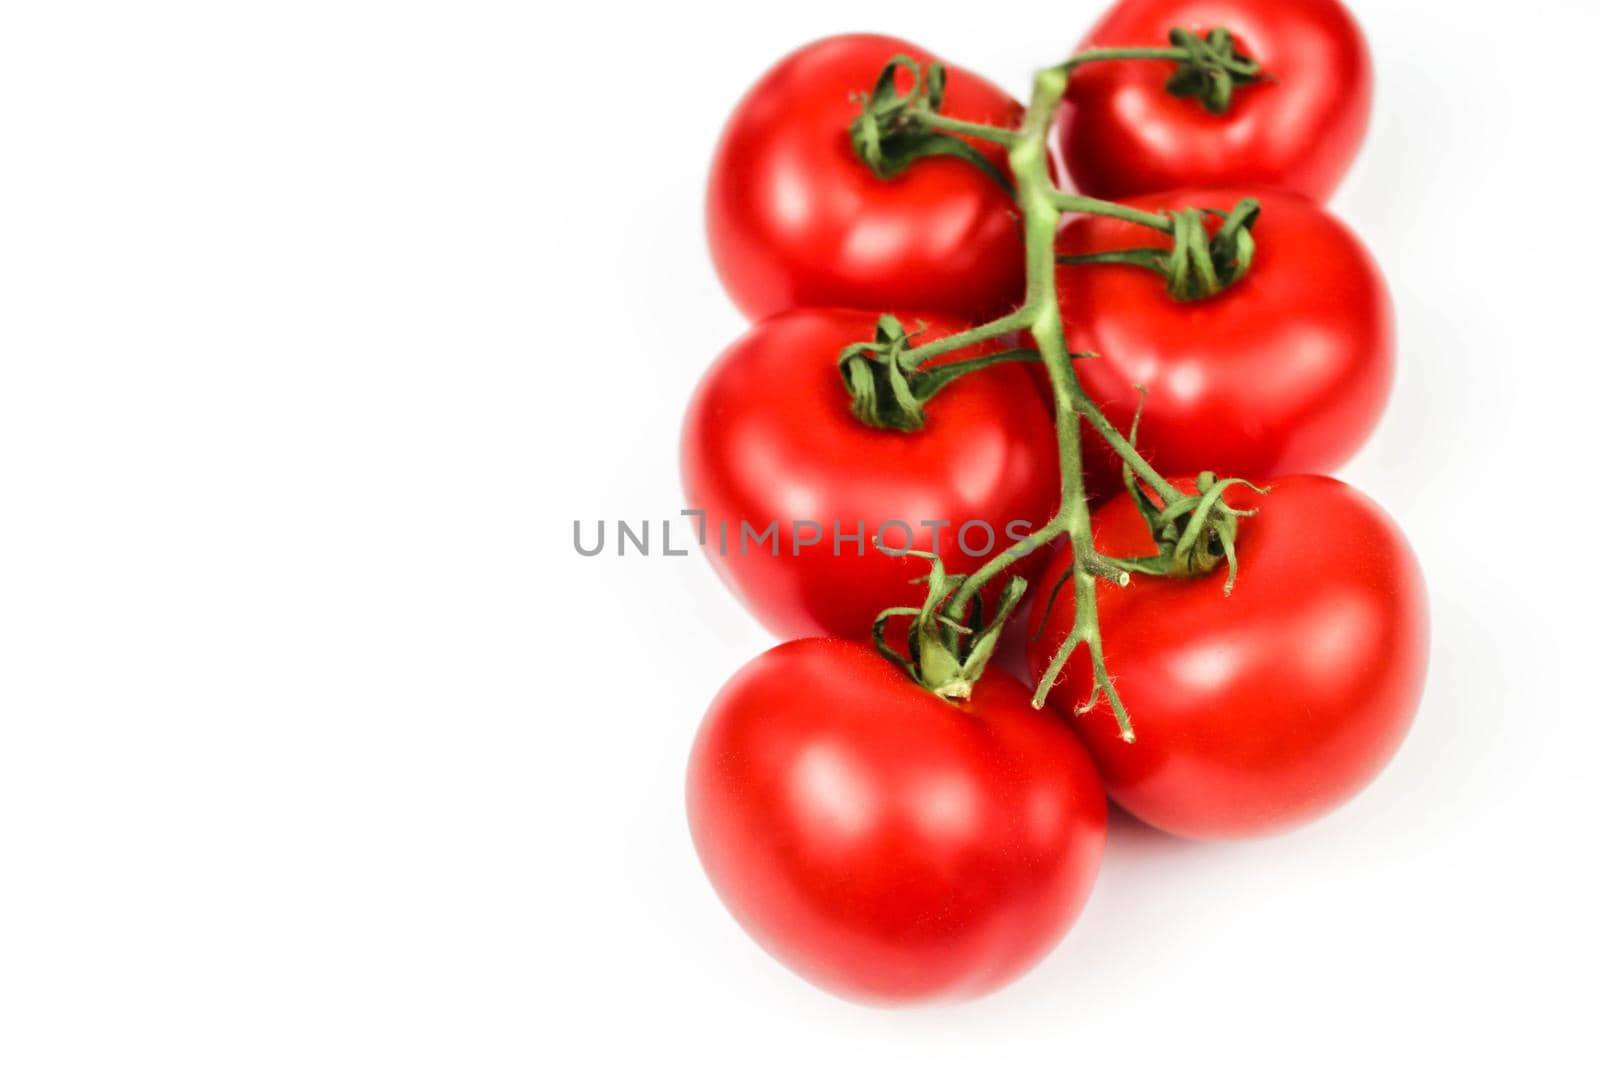 Red tomatoes on white background